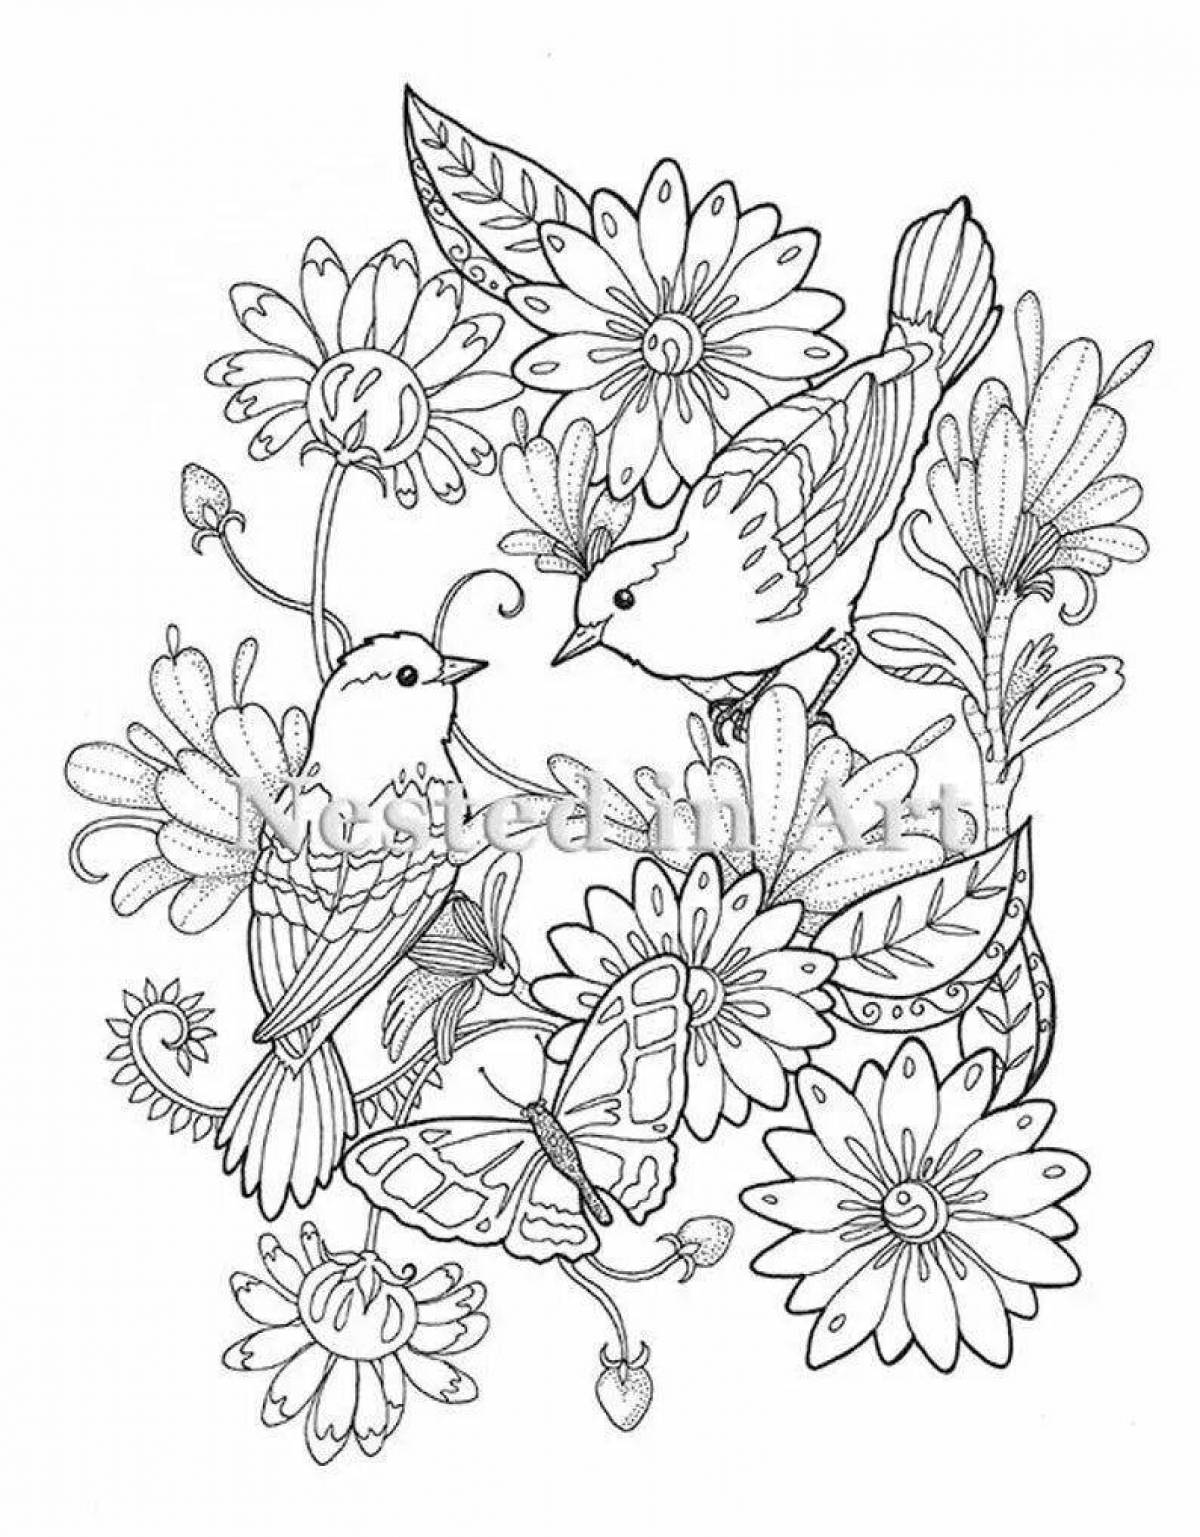 Adorable coloring book for girls nature and flowers animals